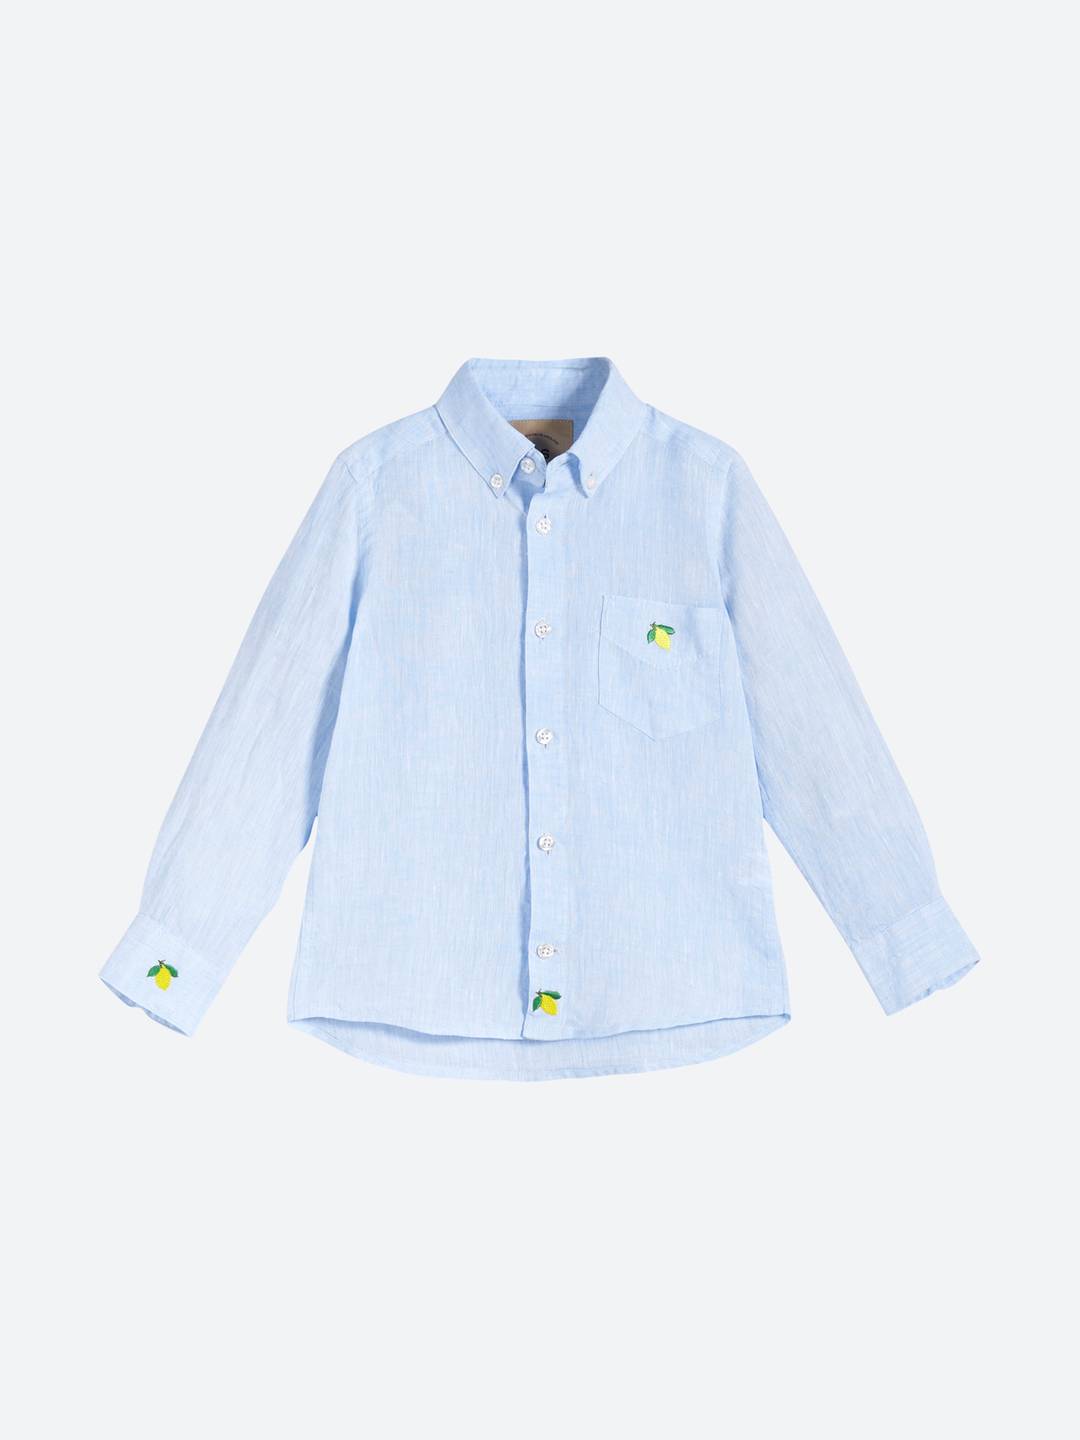 Details about   SUMMER LINEN TOP FOR KIDS Made in Europe Kids Pocket Linen Blouse With Applique 